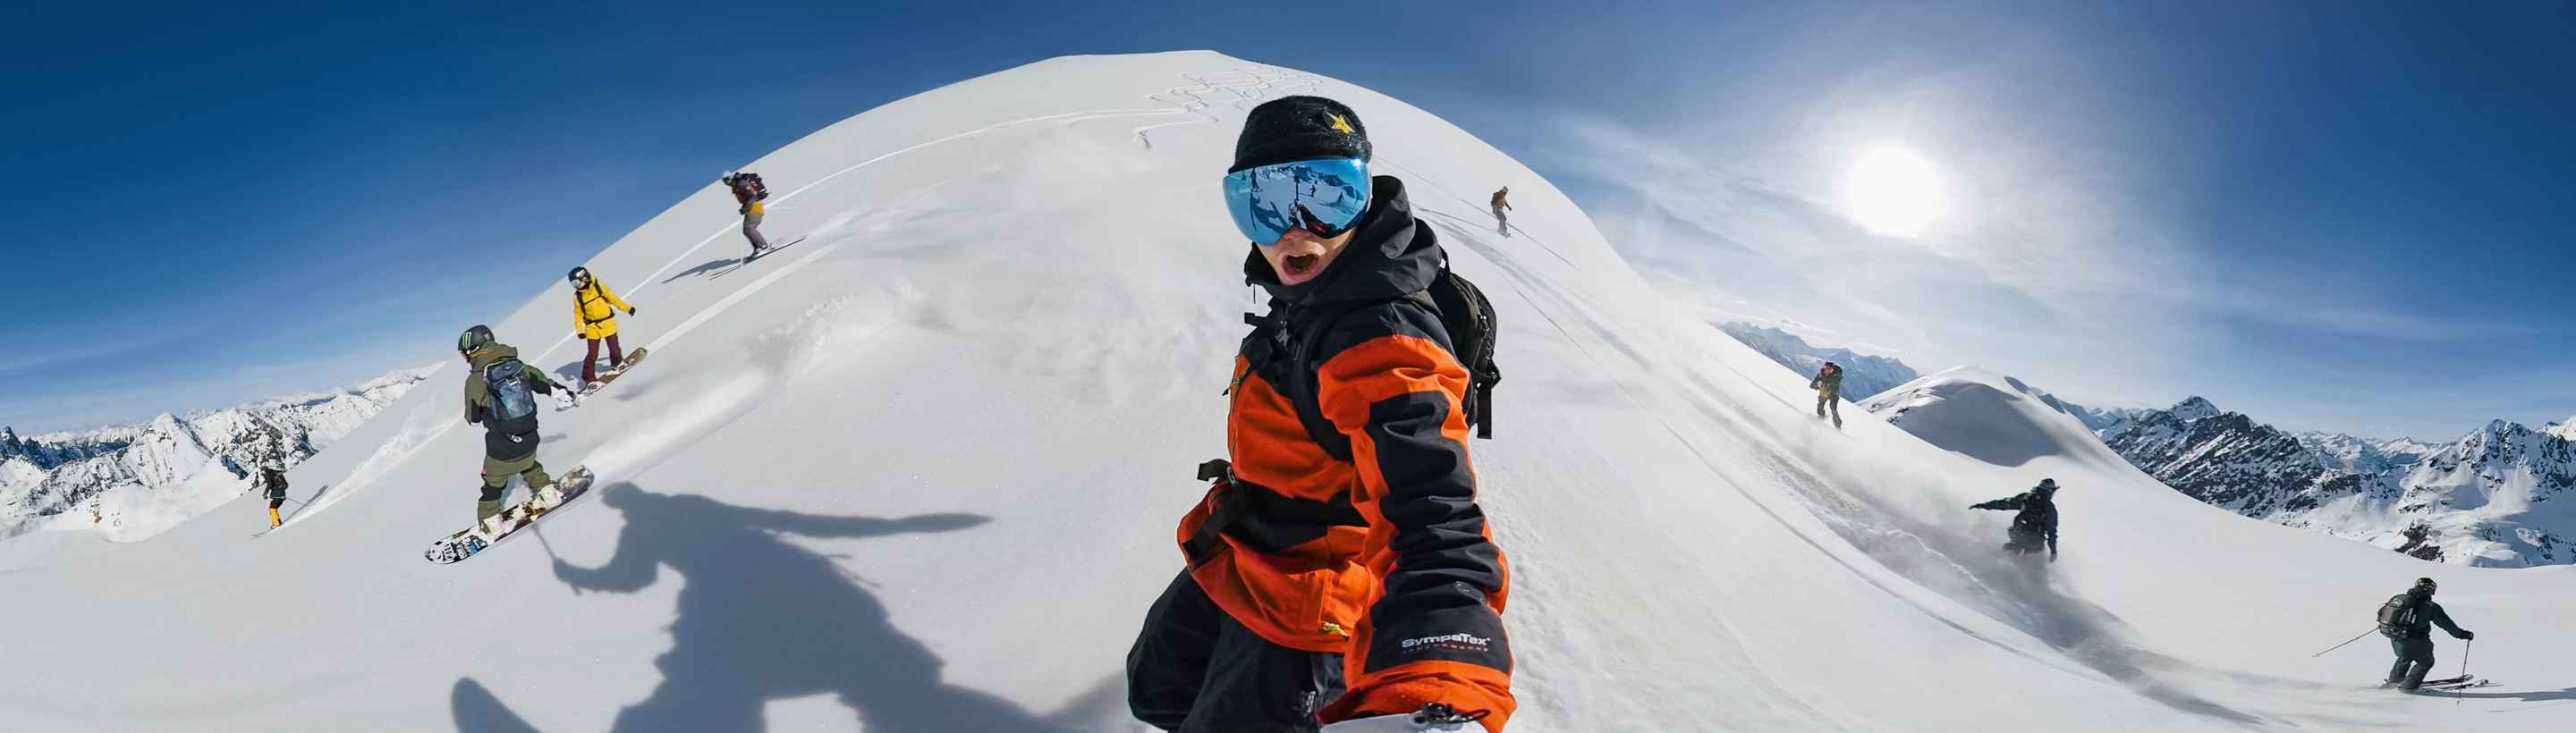 Snowboarder taking a selfie with a full panoramic view of the background through the PowerPano feature.